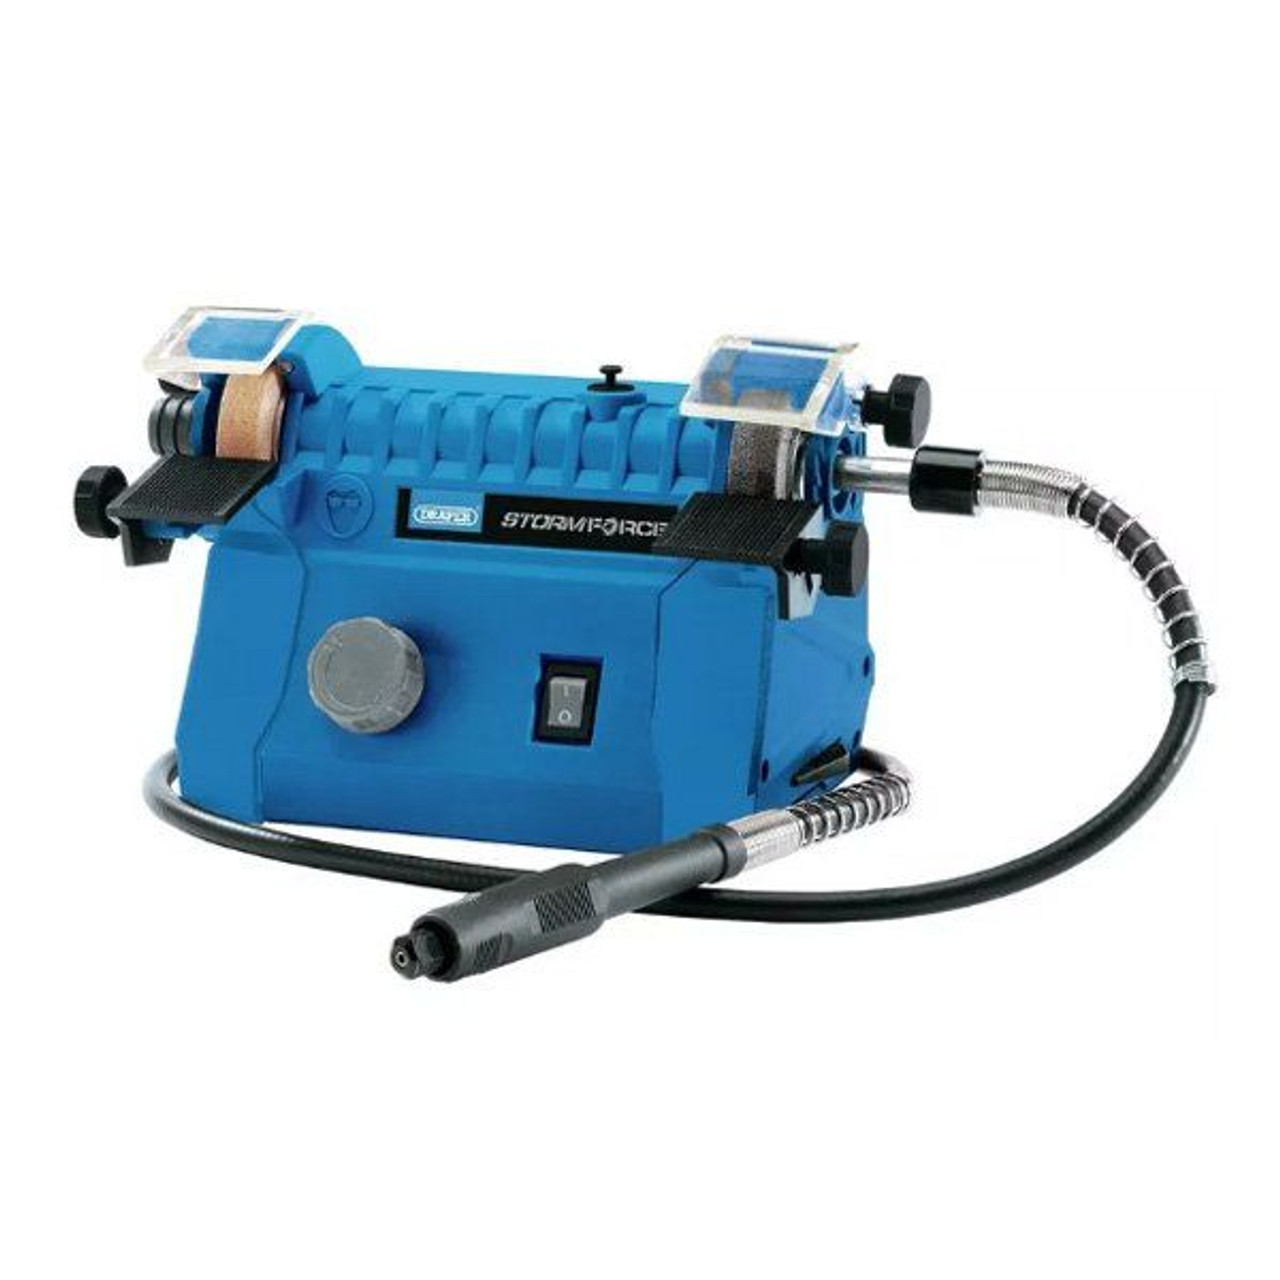 Draper Mini Bench Grinder with flex shaft Robson's Tool King Store